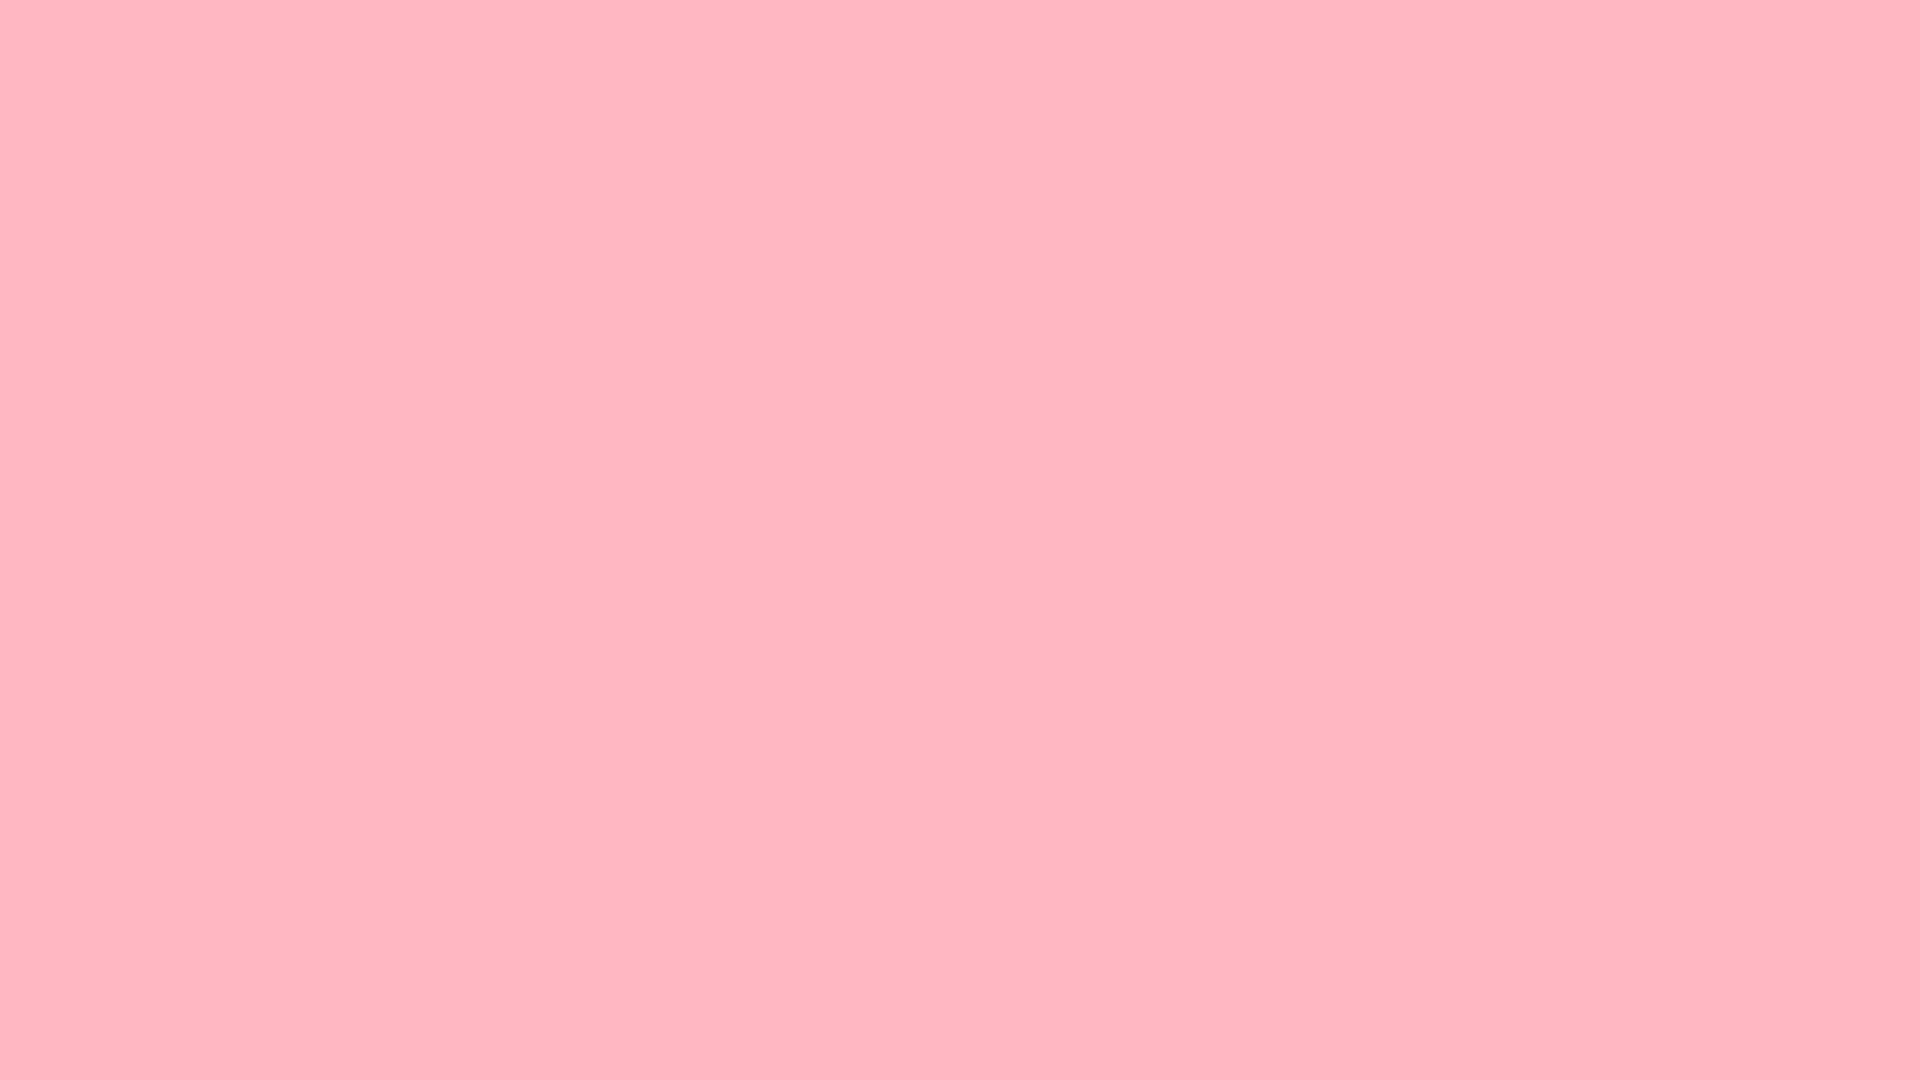 Caption: Abstract Pink Blank Template Background